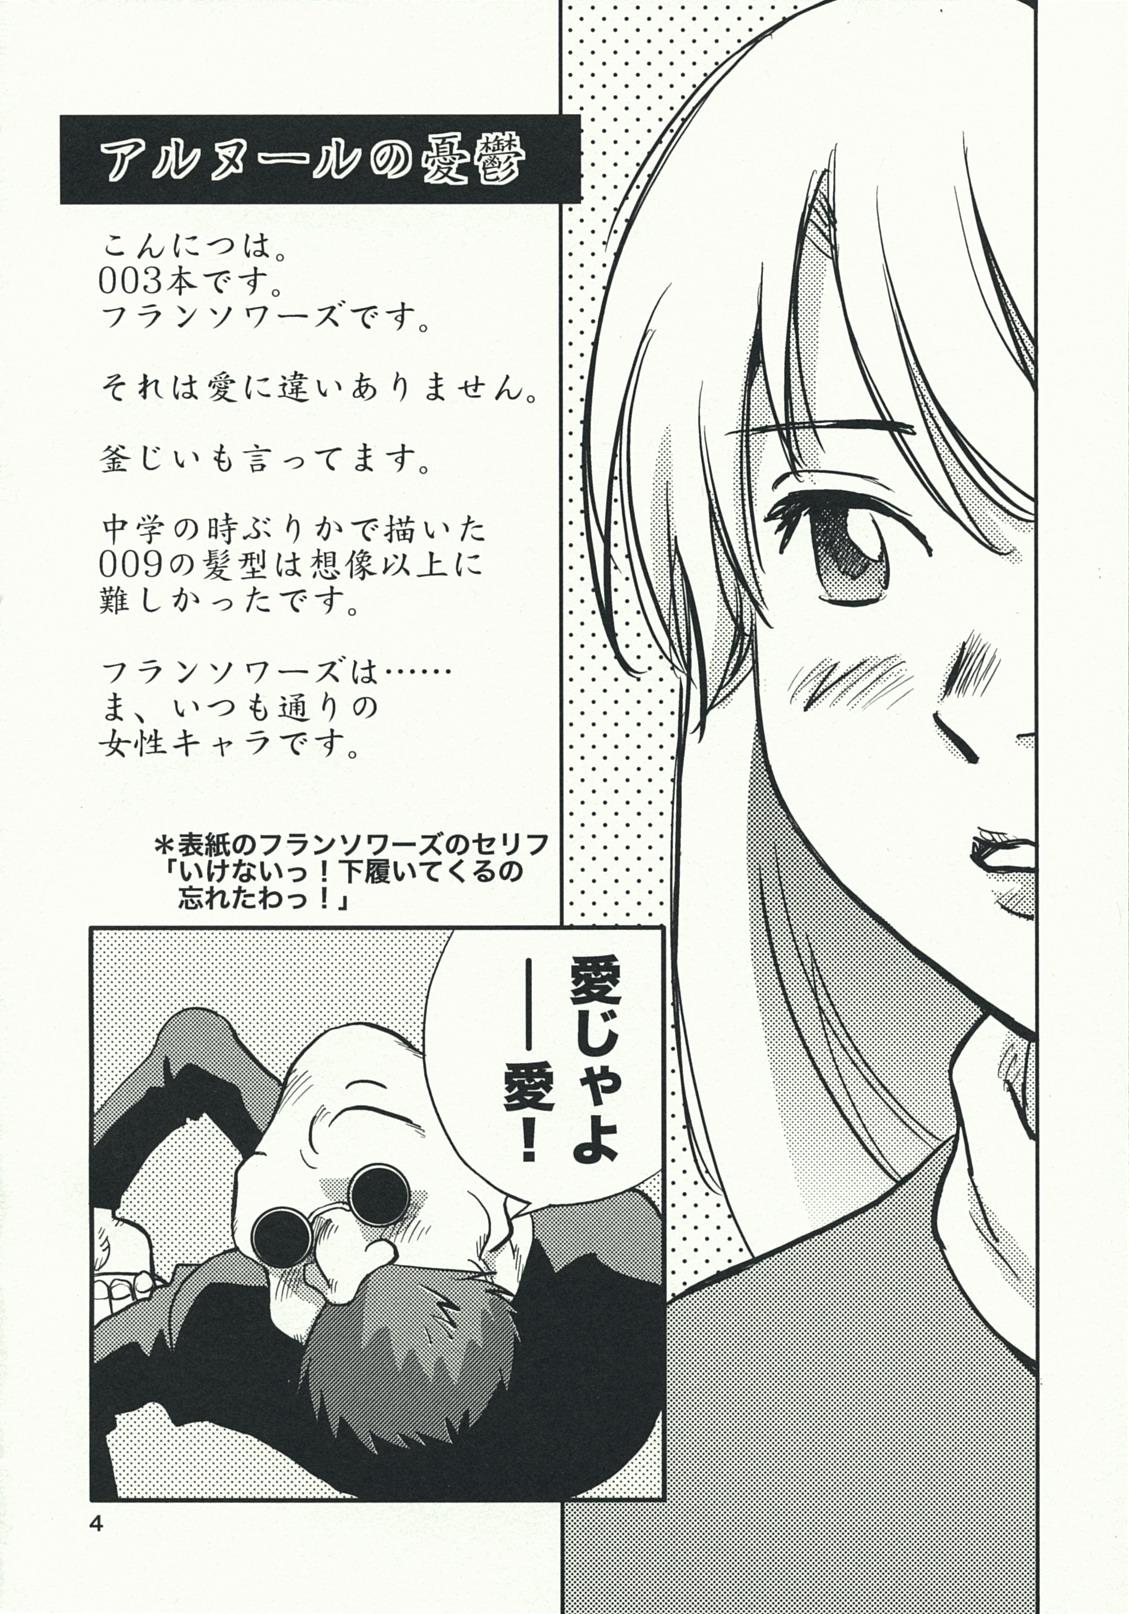 Roughsex Arnoul no Yuuutsu | The Melancholy of Arnoul - Cyborg 009 Chunky - Page 3